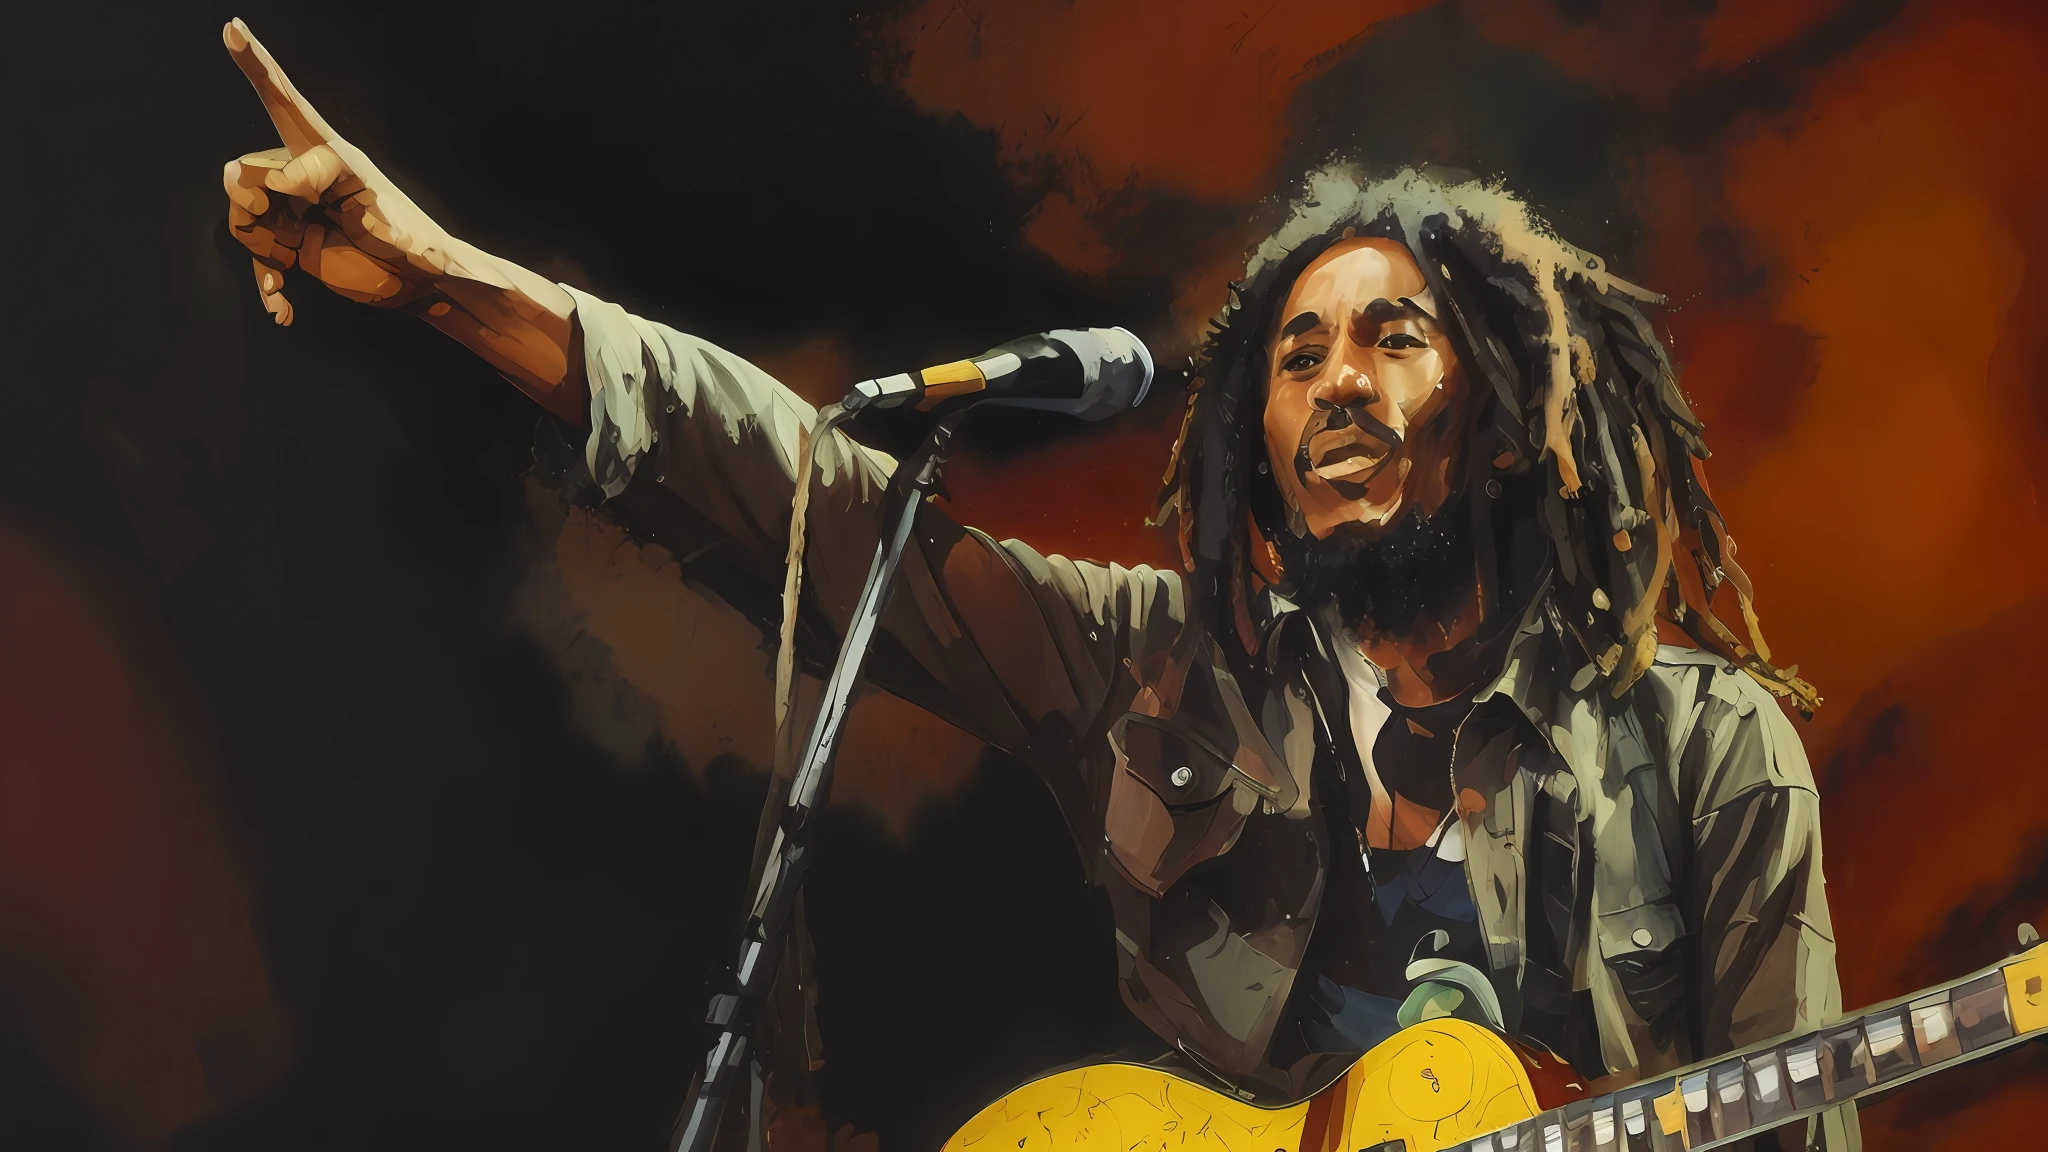 Arafed man with dread, Bob Marley, concert photography from the 70s, photo courtesy museum of art, against a deep black background, reggae, on black background, Bob Marley playing guitar, reggae art, with a brilliant, playing guitar onstage, bright-colored stage lights